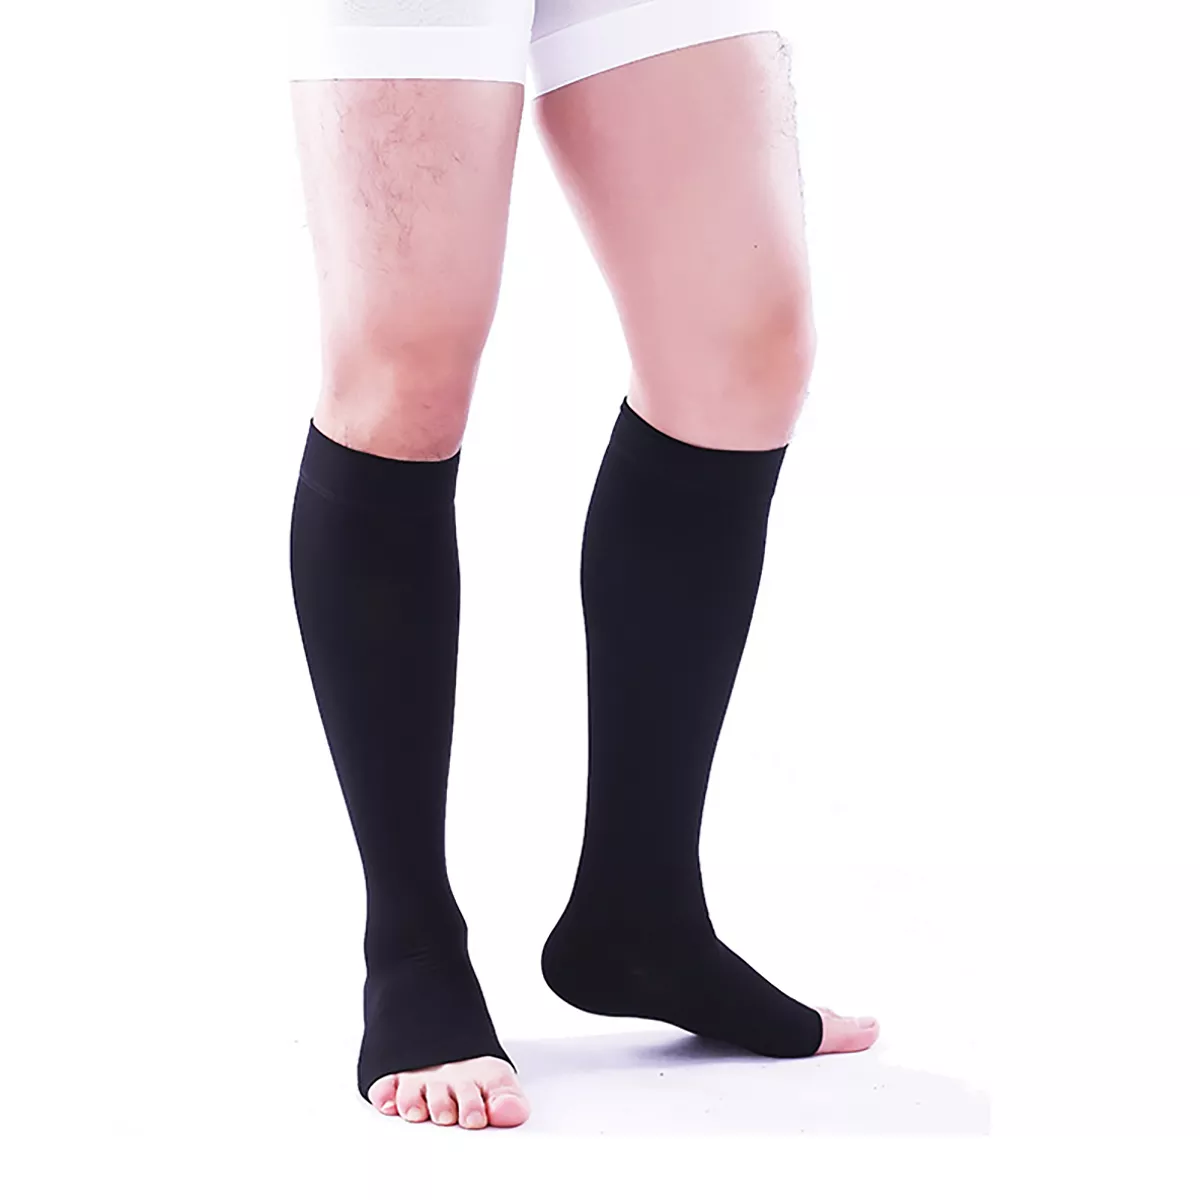 1 Pair Knee High Open Toe Compression Stocking Unisex Socks for Varicose  Veins Relief Fatigue Below Knee Leg Therapy Support 30-40 MmhgSize: M/L/XL  